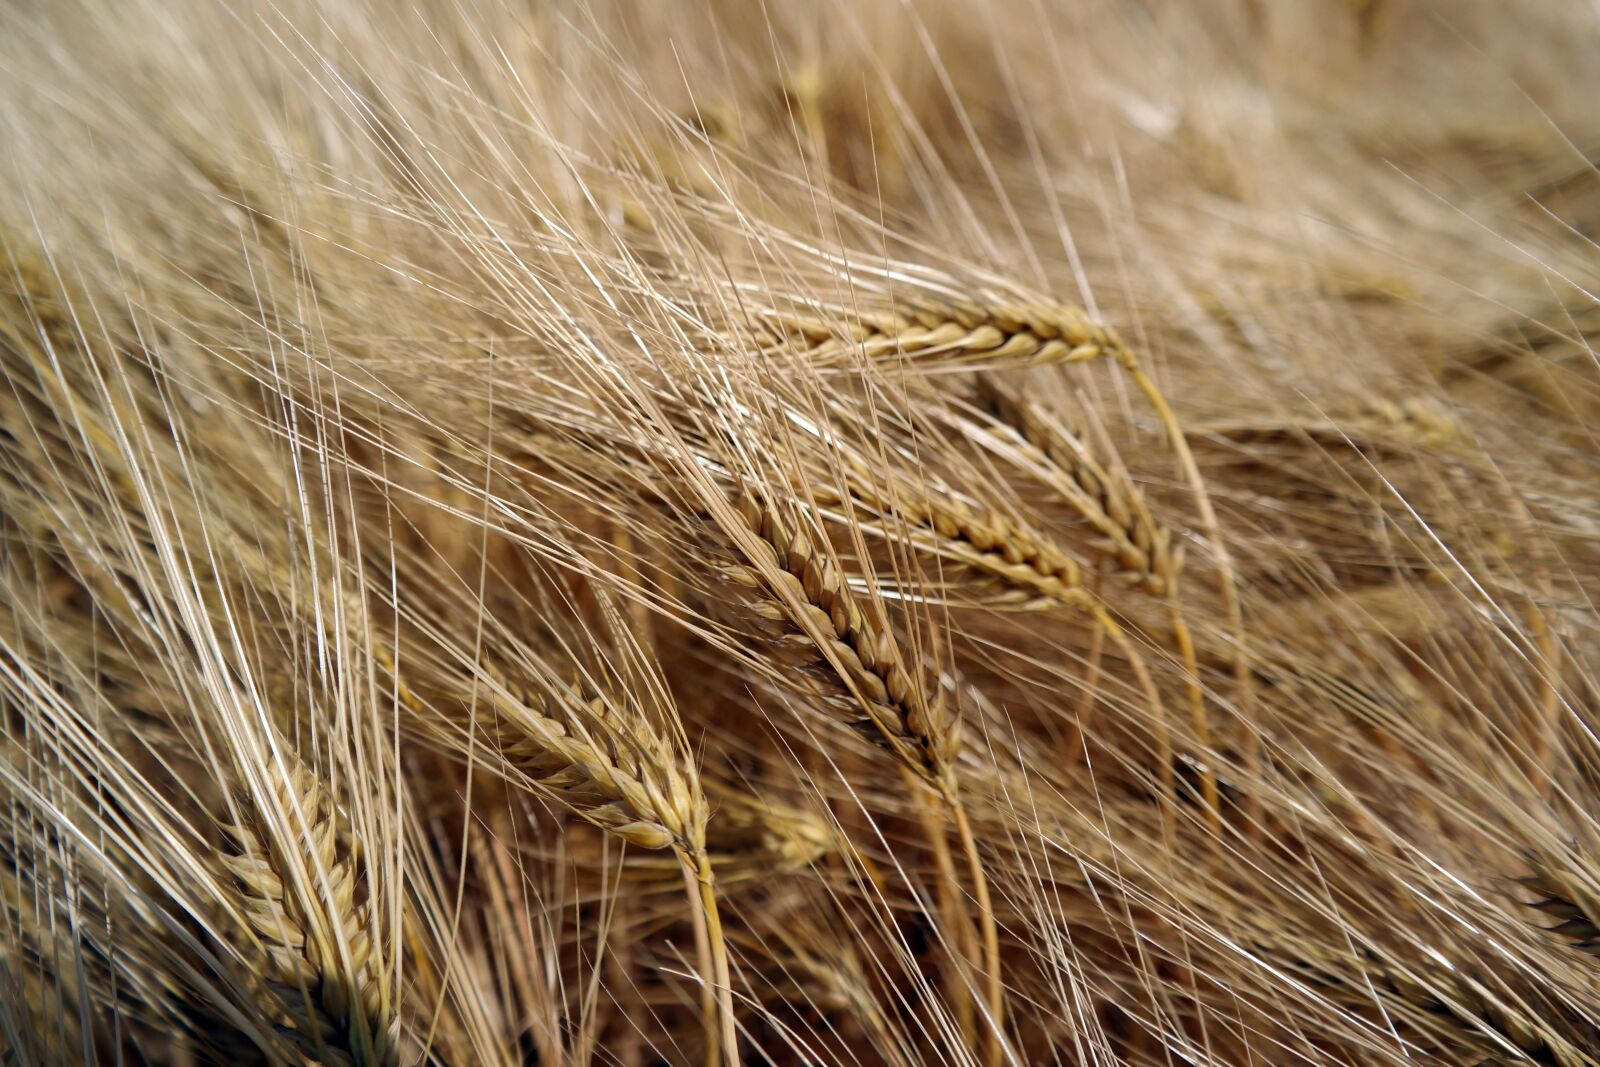 NX 18-55mm F3.5-5.6 sample photo. Wheat, grain, agriculture photography